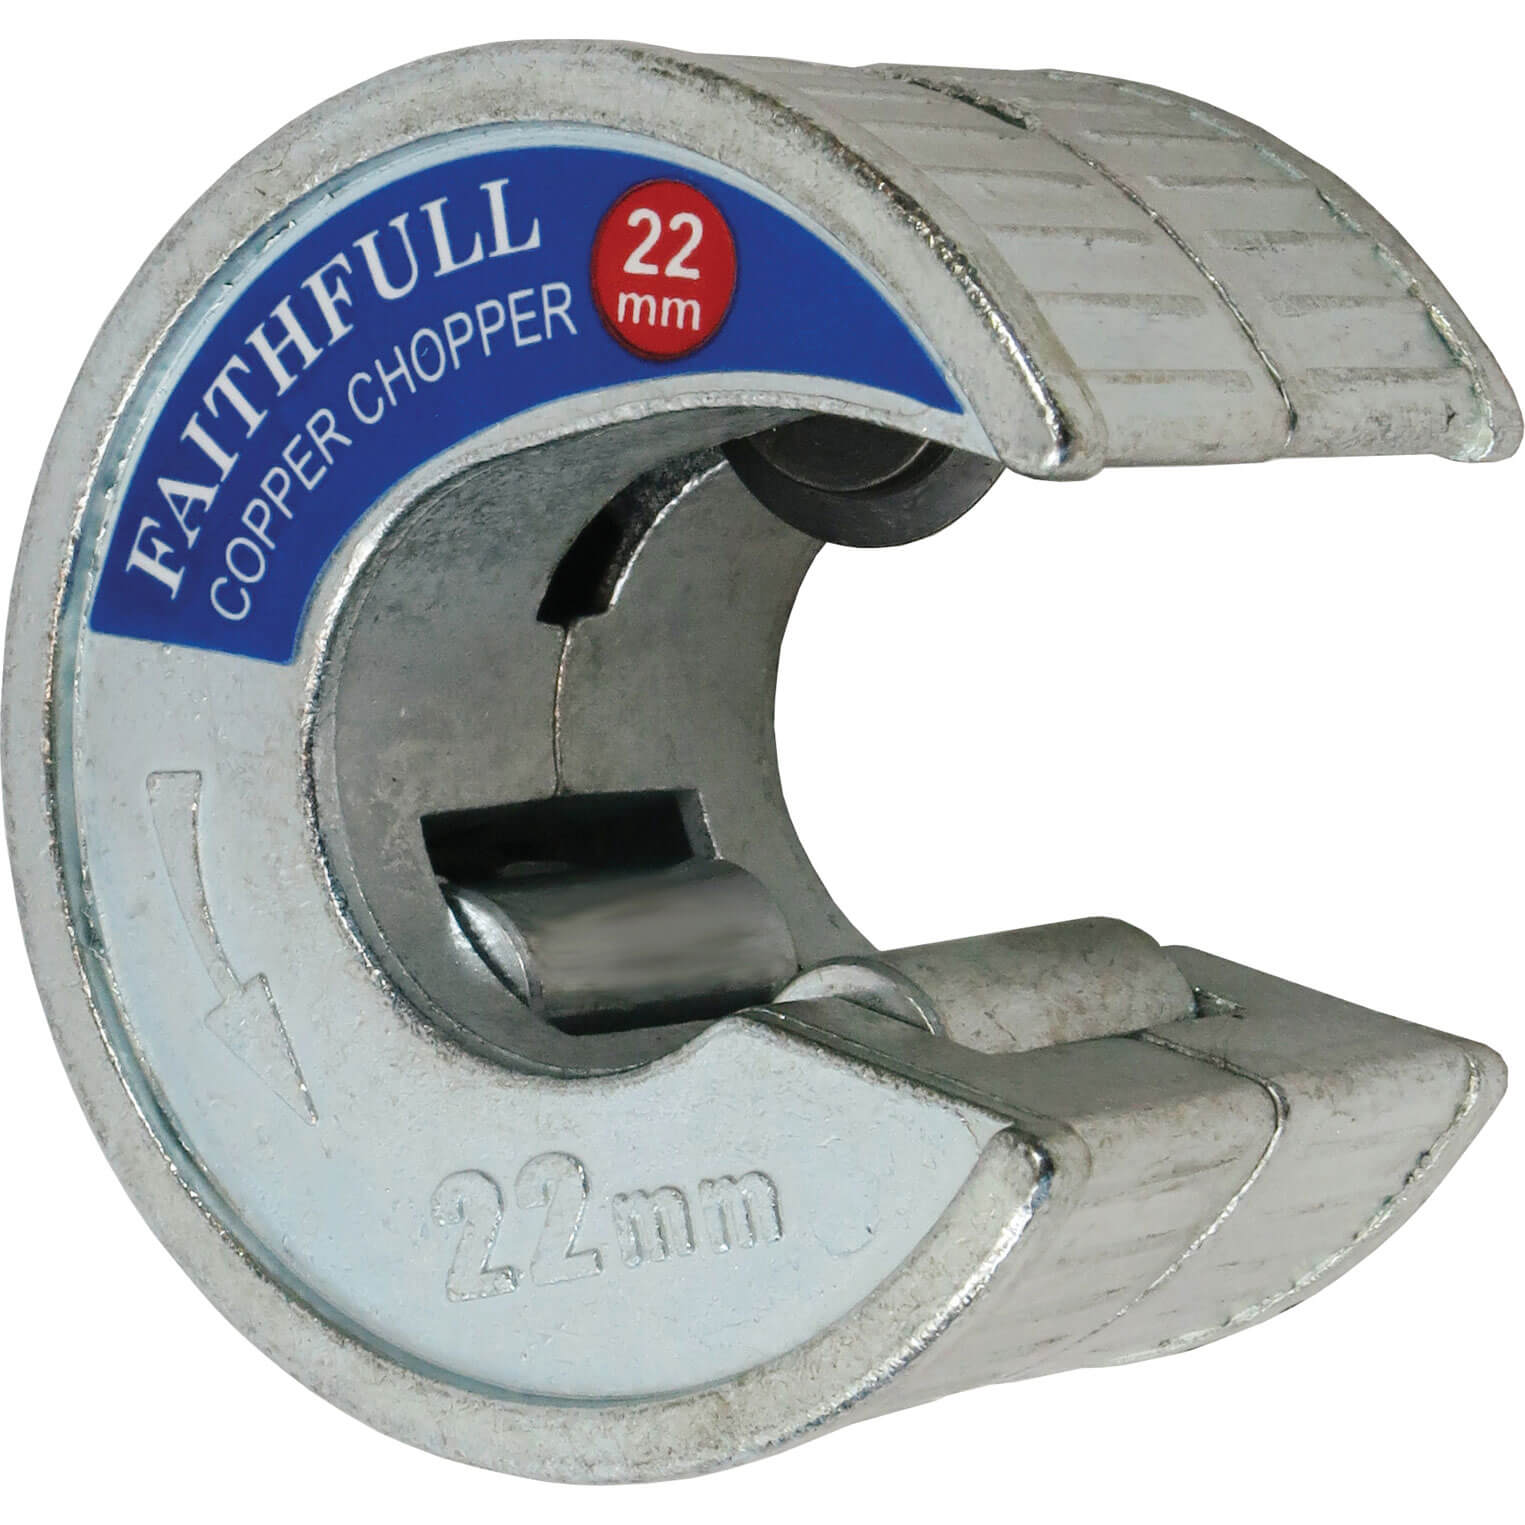 Image of Faithfull Copper Pipe Cutter 22mm